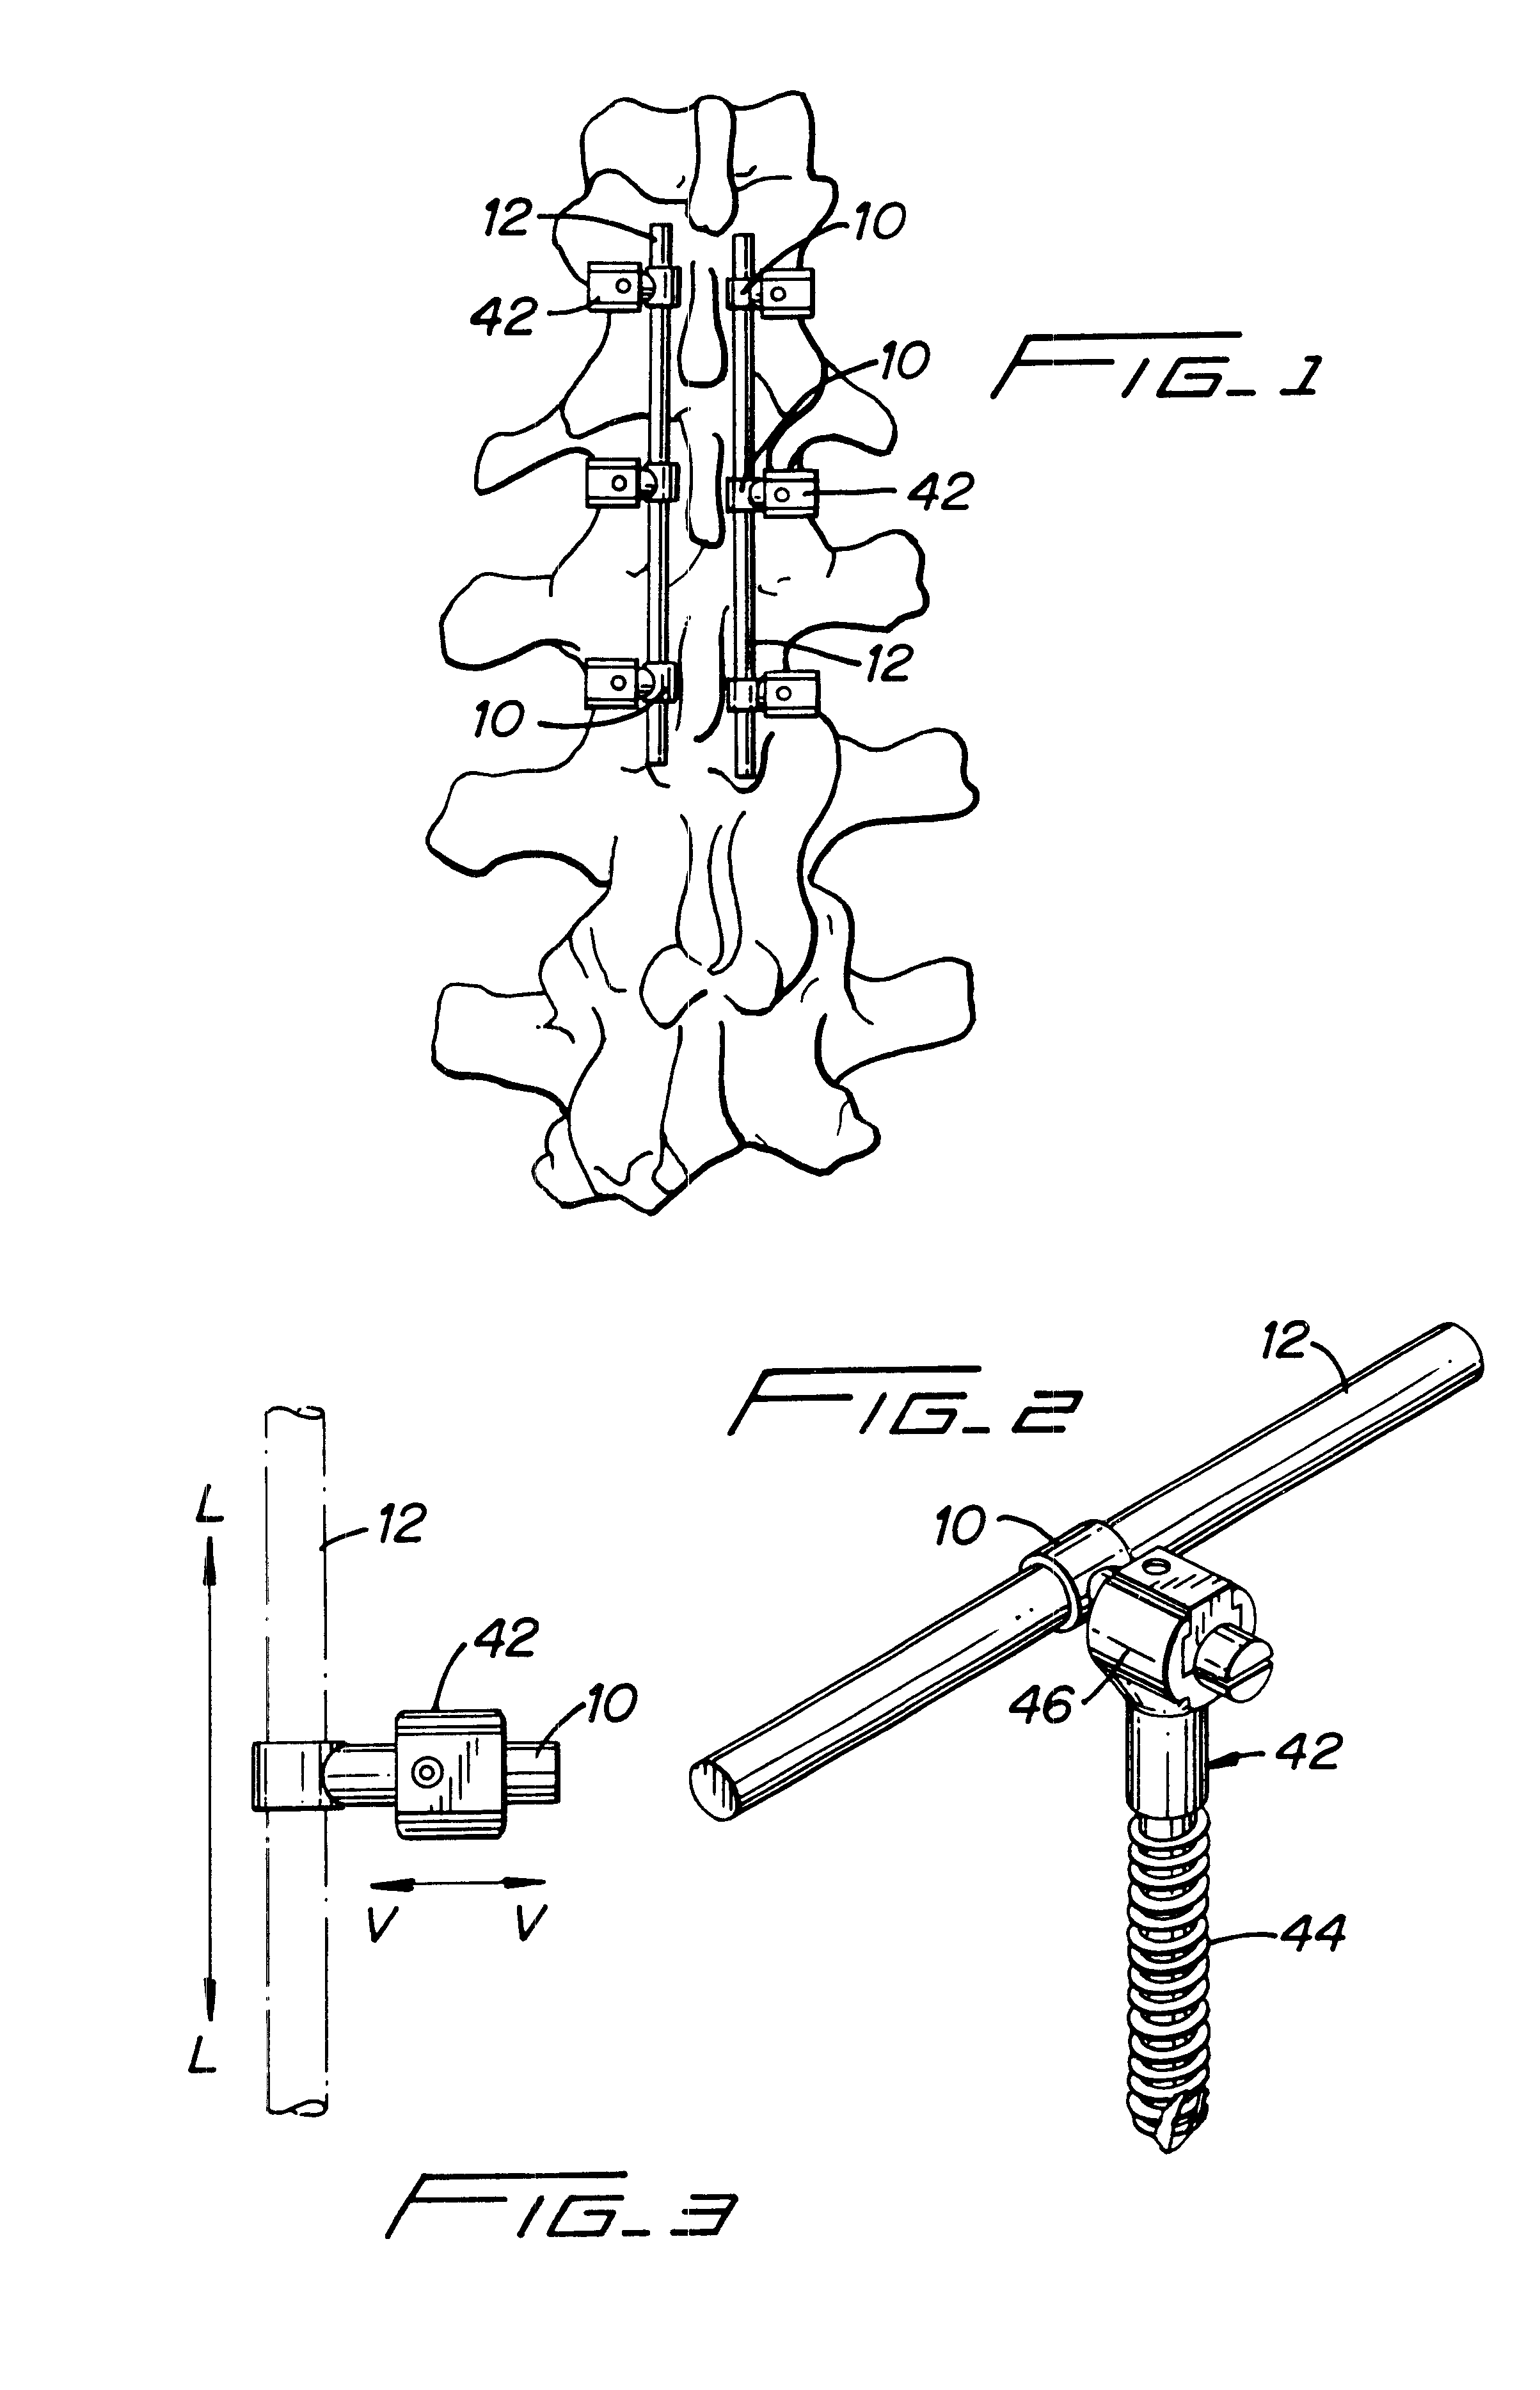 Clamping connector for spinal fixation systems